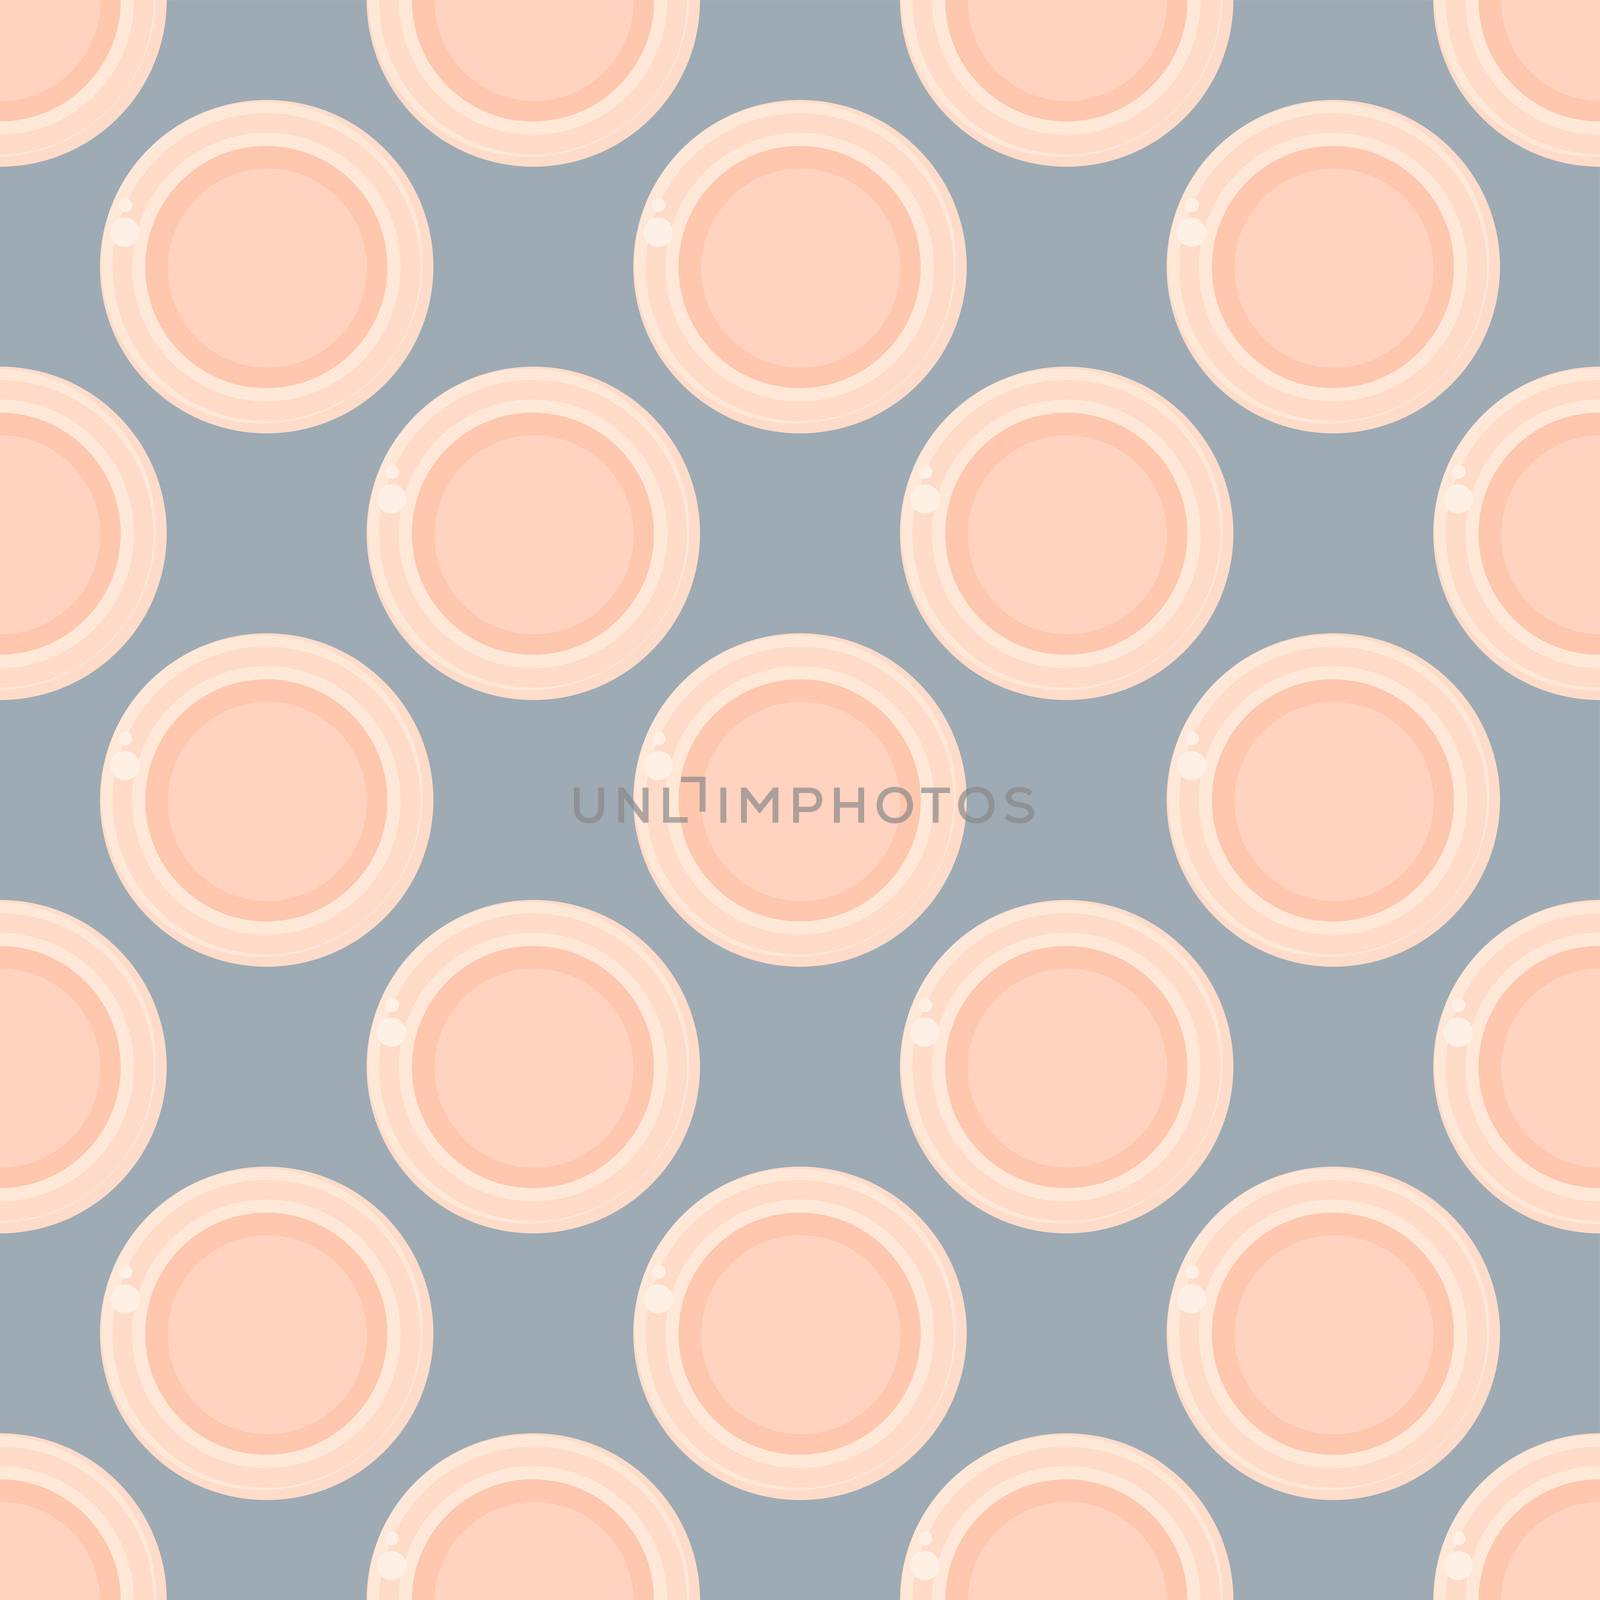 Baby plate pattern , illustration, vector on white background